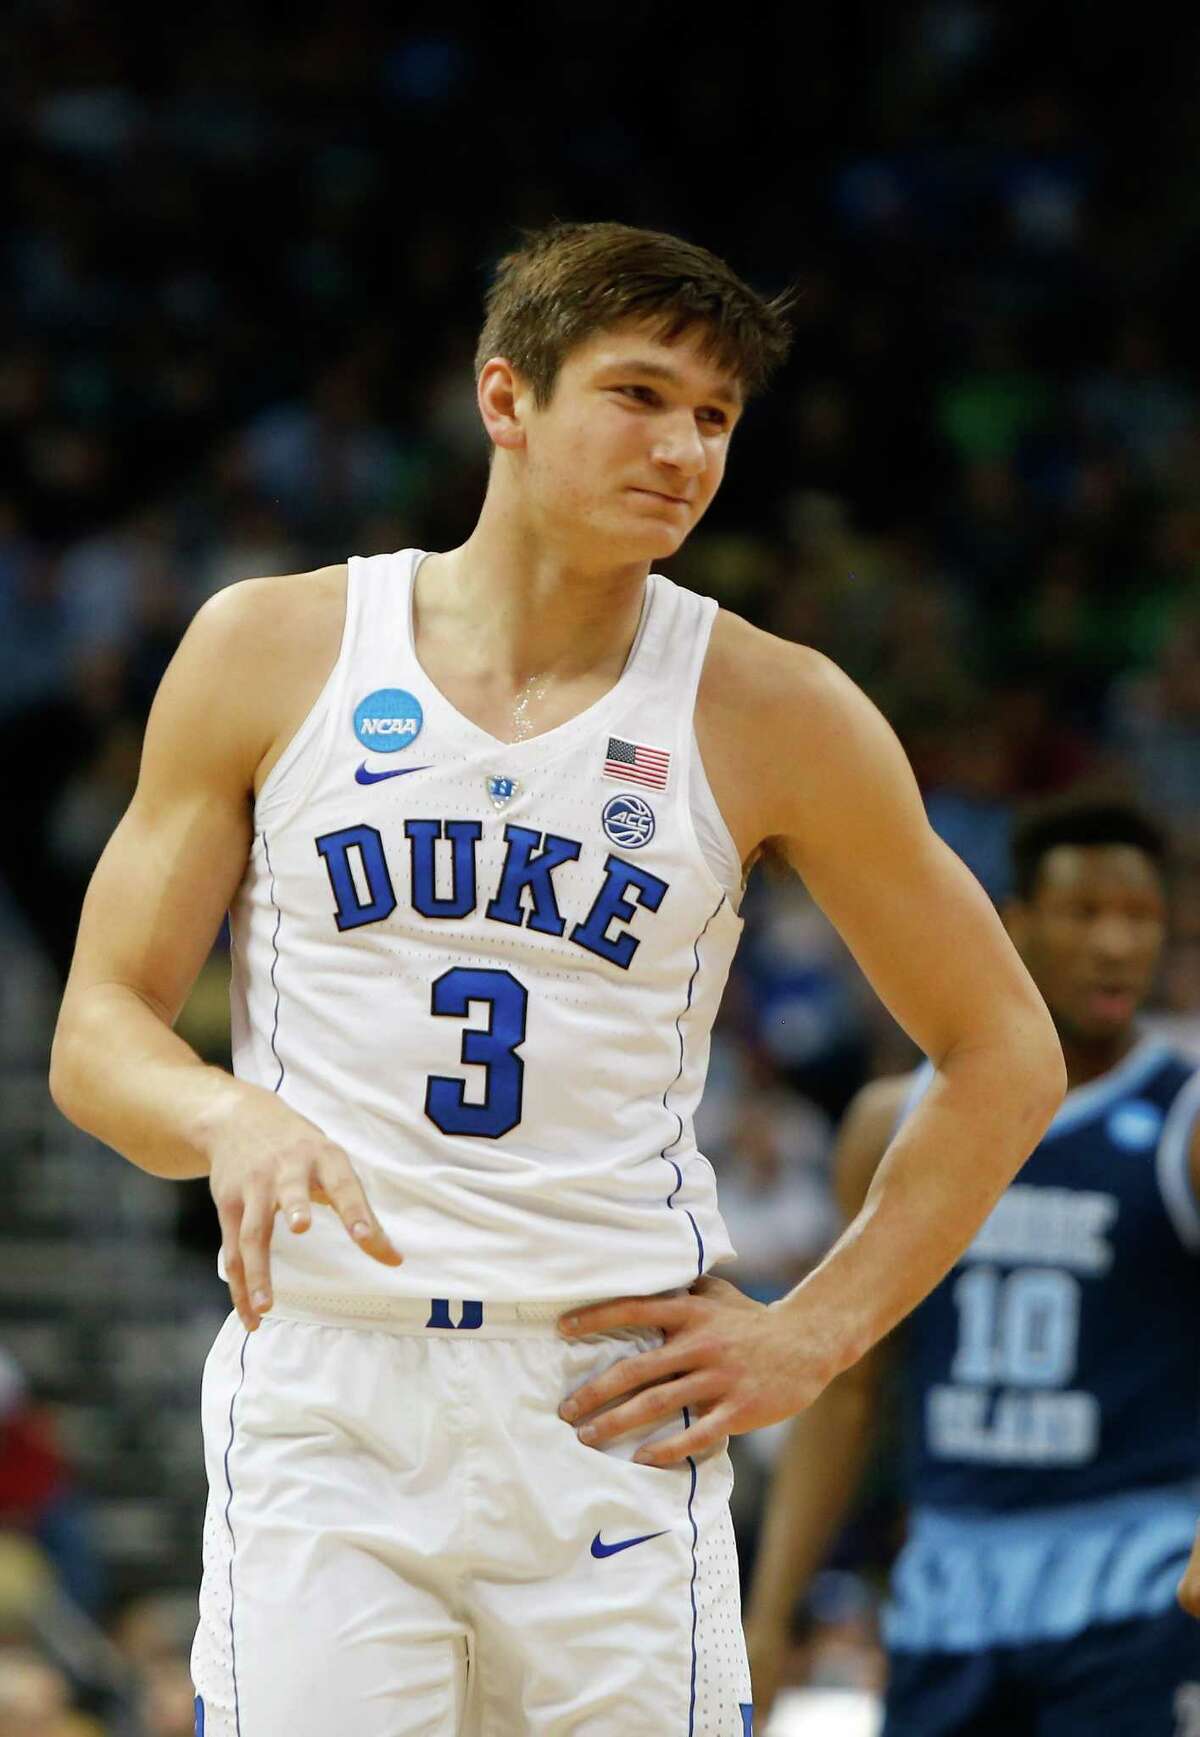 PITTSBURGH, PA - MARCH 17: Grayson Allen #3 of the Duke Blue Devils looks on against the Rhode Island Rams during the first half in the second round of the 2018 NCAA Men's Basketball Tournament at PPG PAINTS Arena on March 17, 2018 in Pittsburgh, Pennsylvania. (Photo by Justin K. Aller/Getty Images)